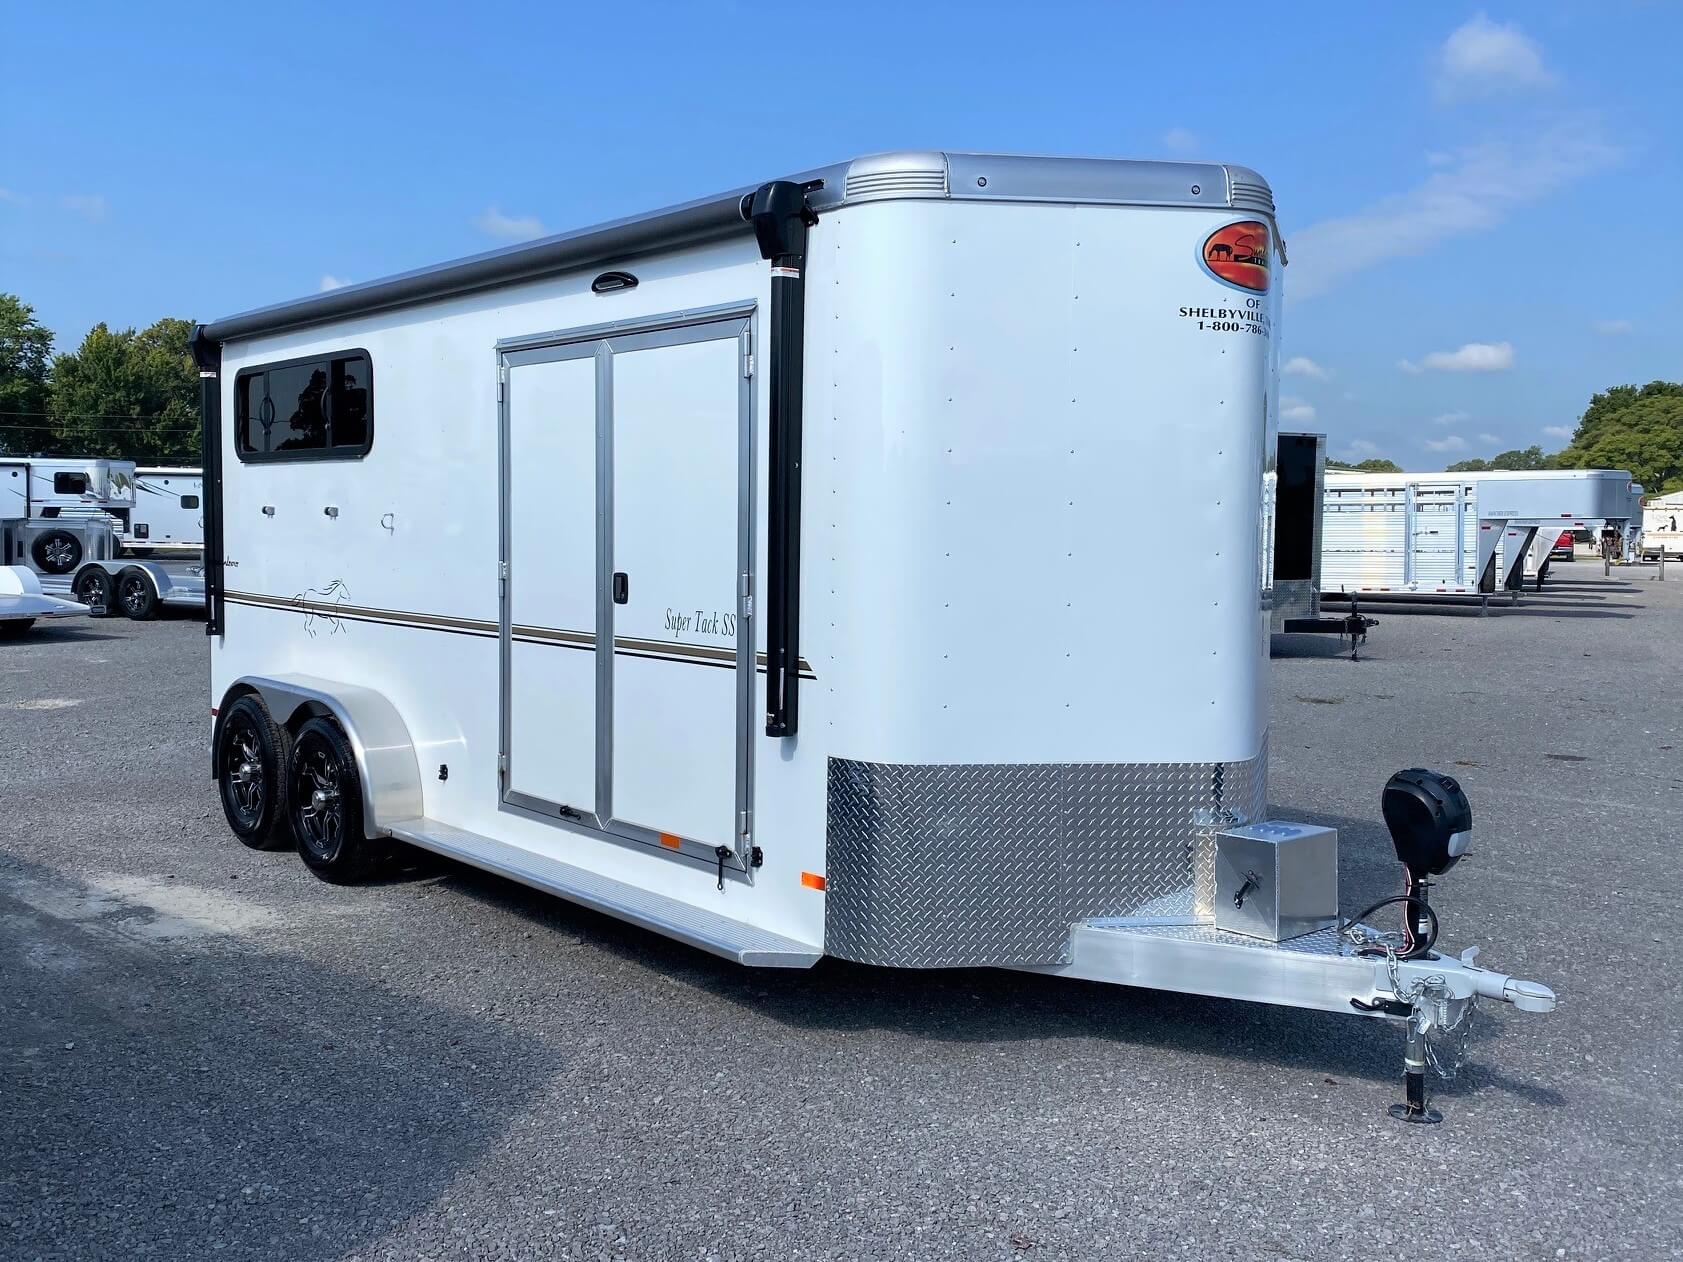 Horse Trailers